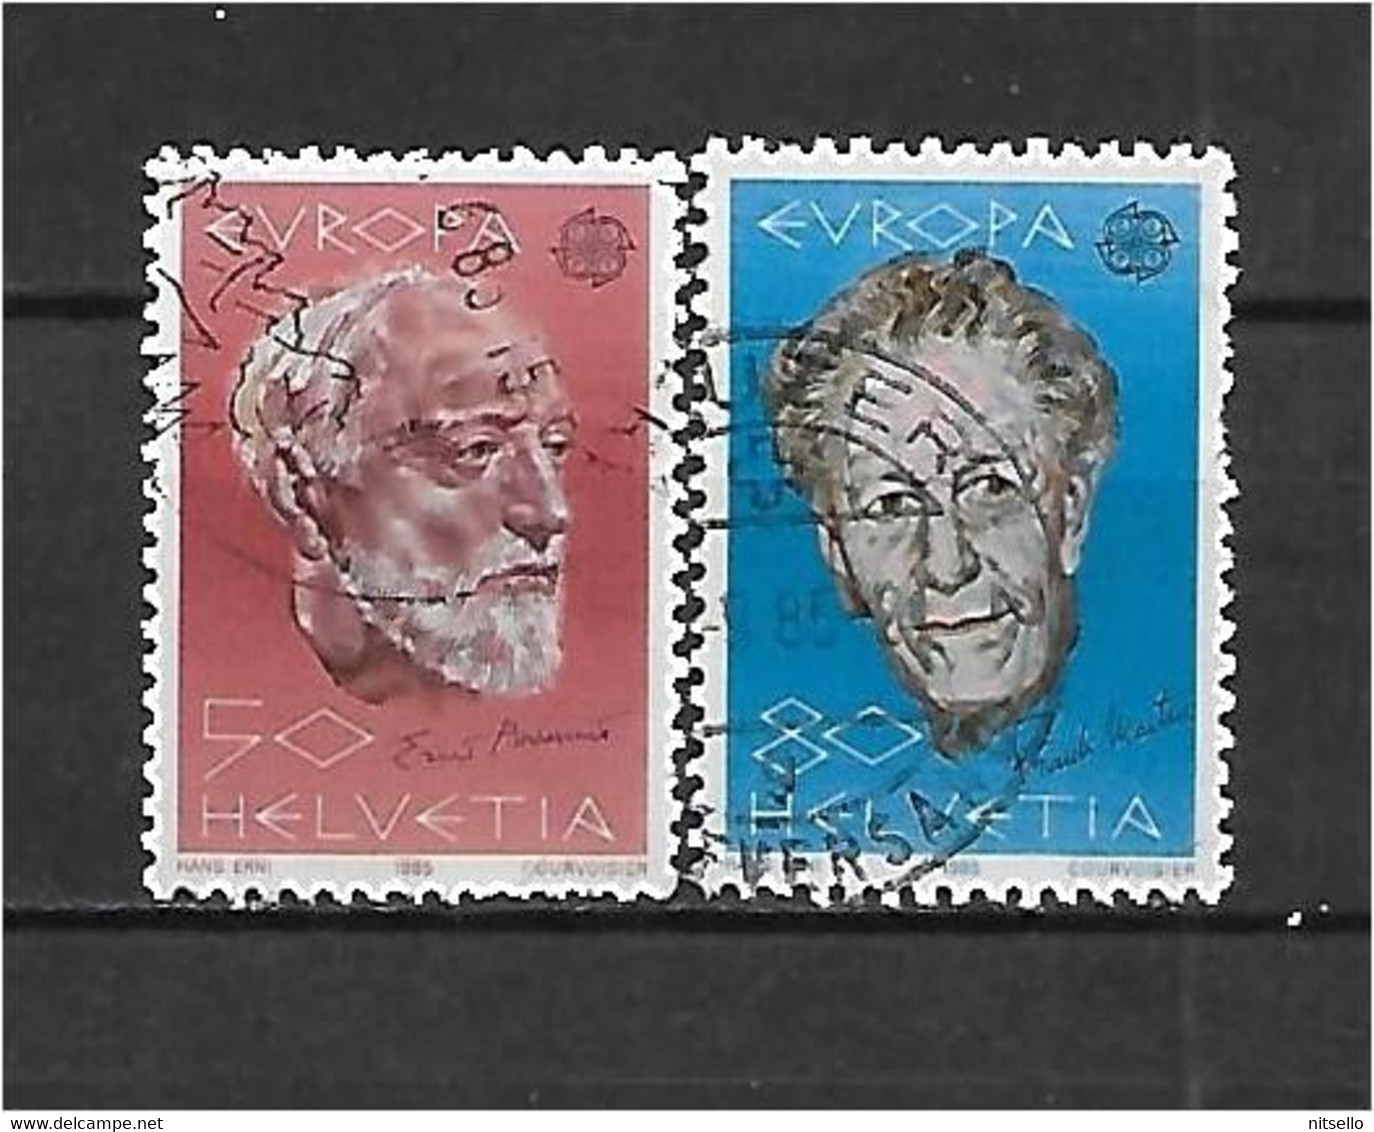 LOTE 1530A  ///  SUIZA   YVERT Nº:1223/4   ¡¡¡ OFERTA - LIQUIDATION - JE LIQUIDE !!! - Used Stamps